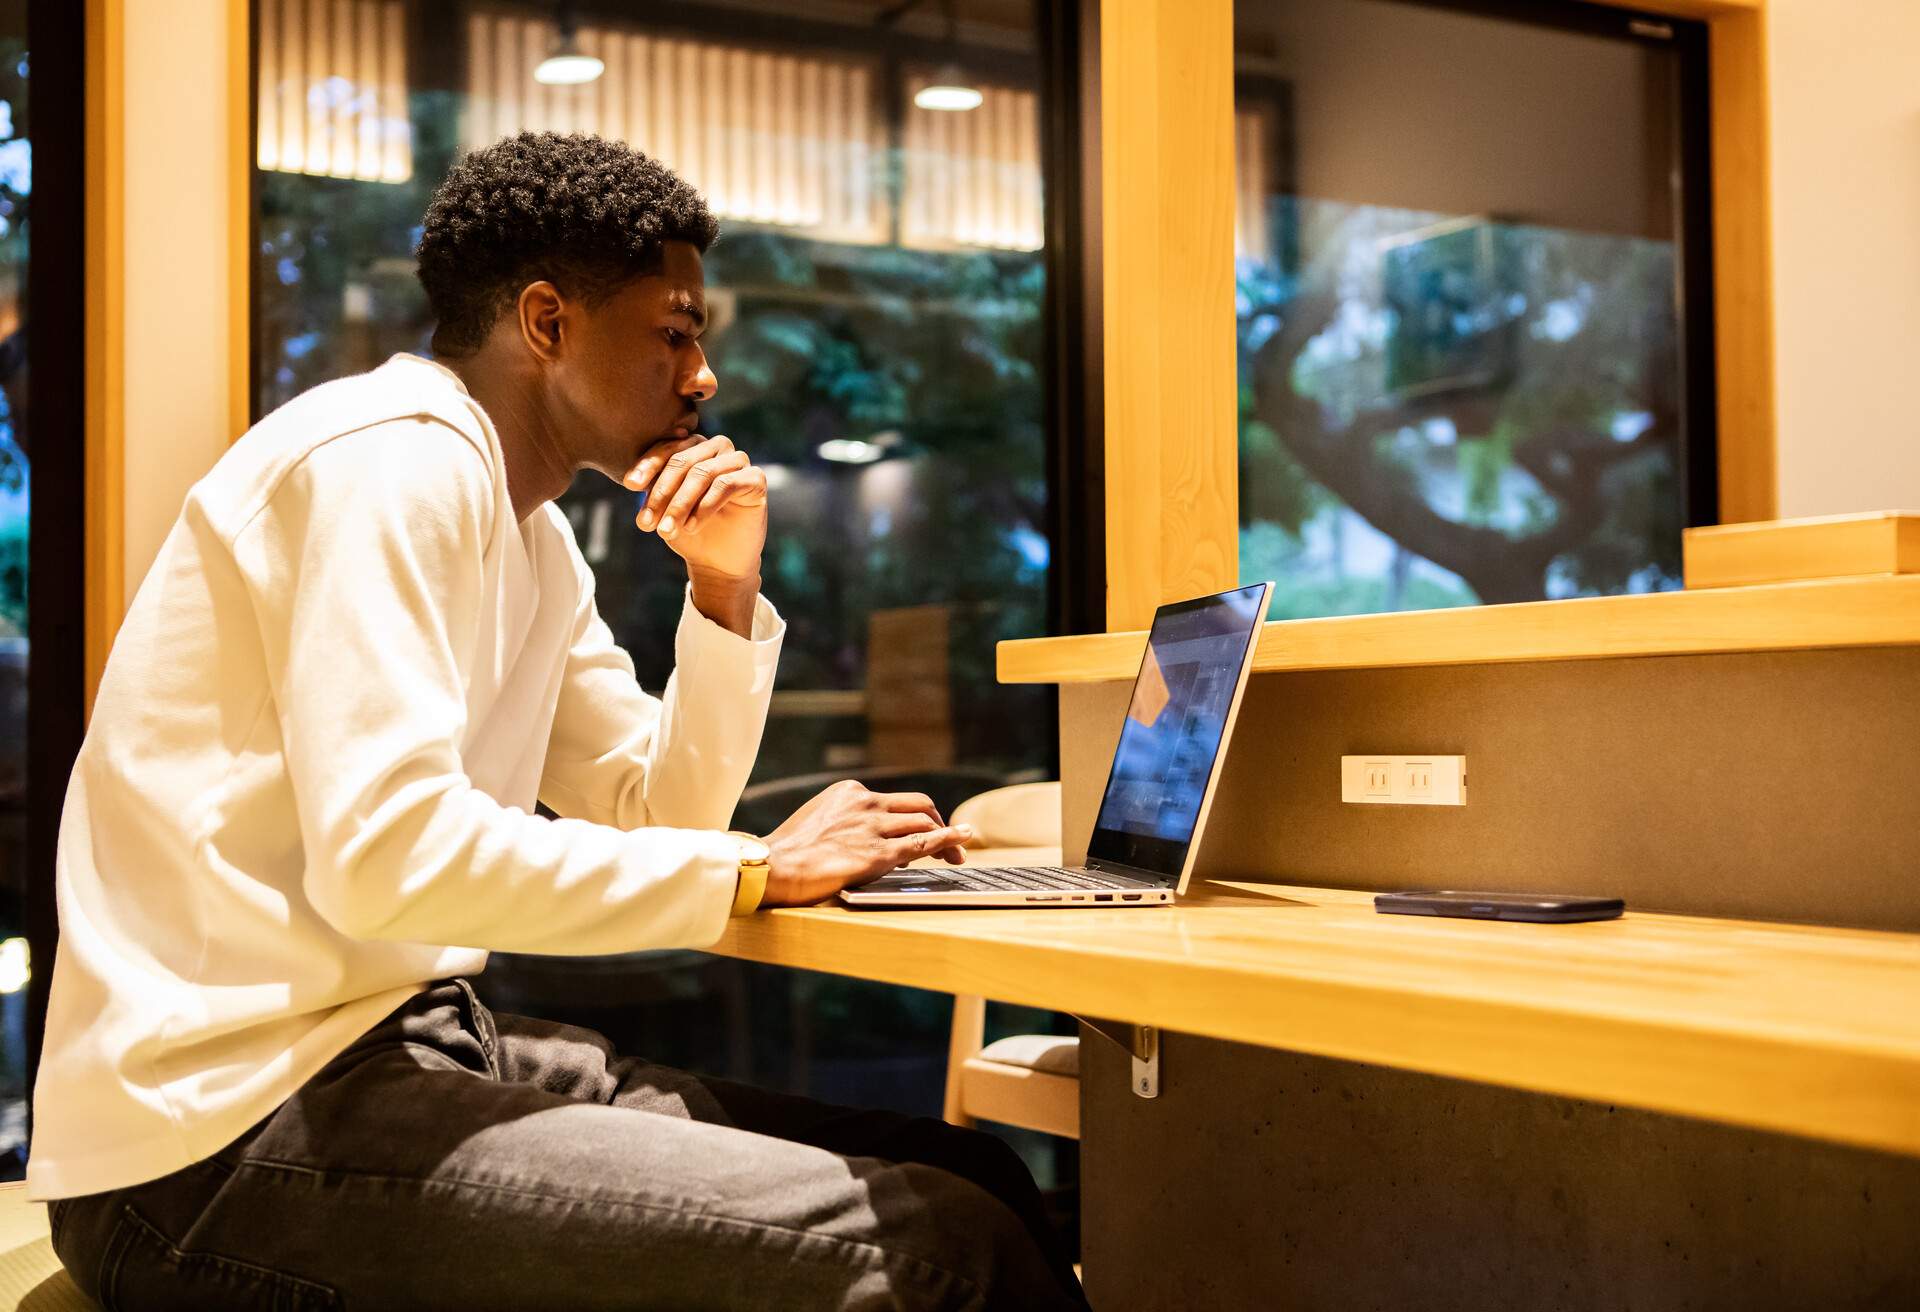 A young man sitting at a café, focused on his laptop.